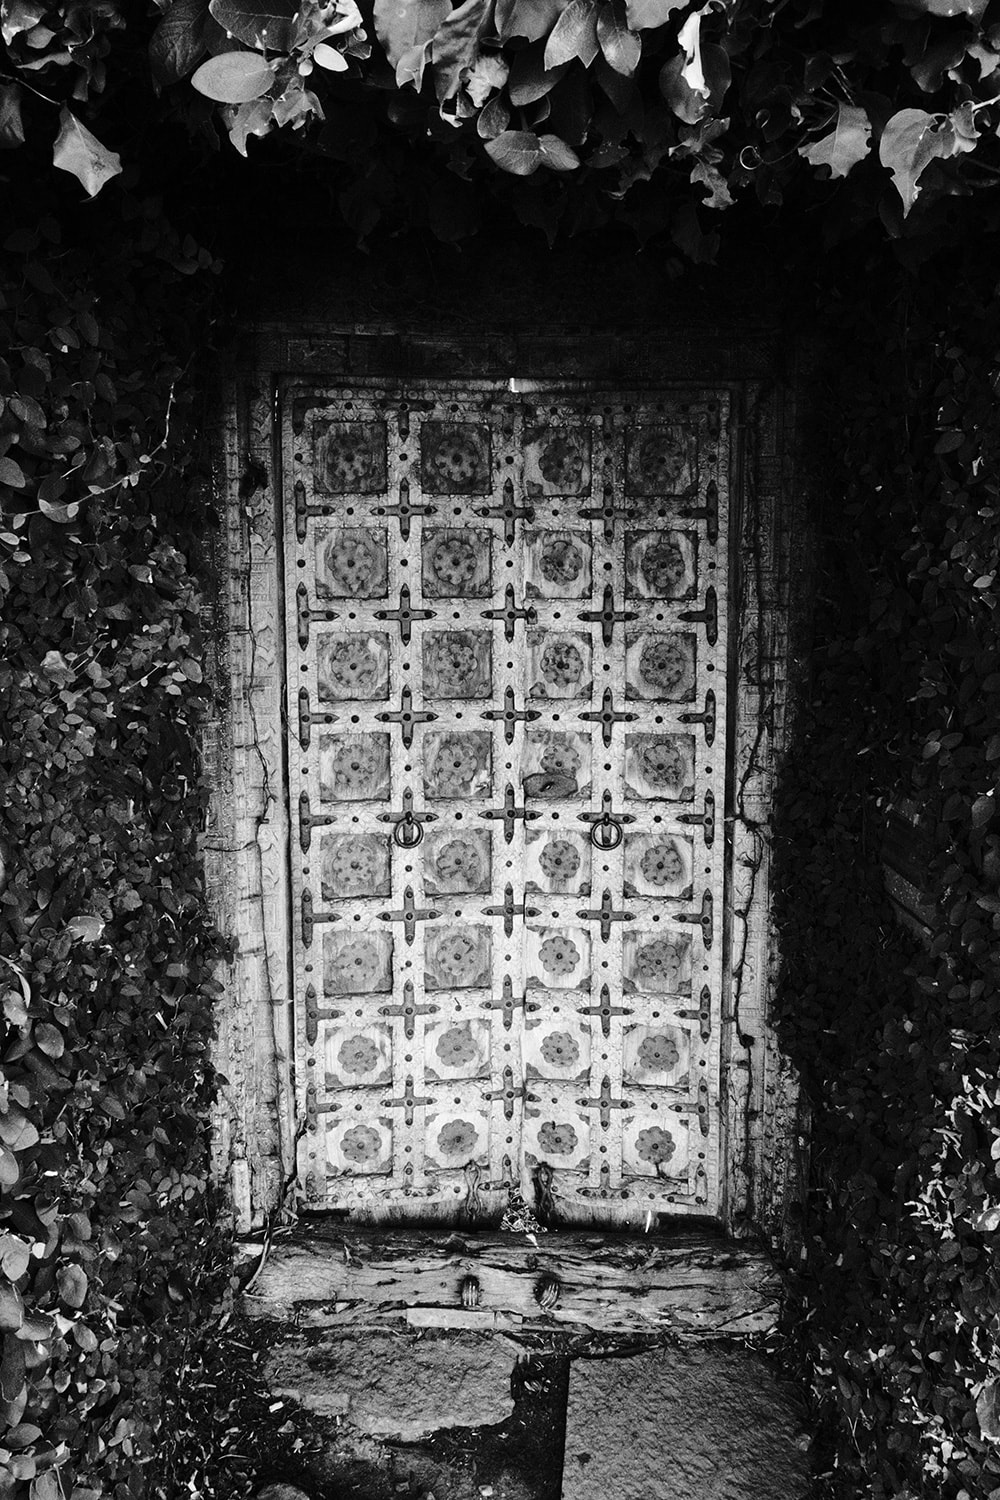 Black and white portrait photo of a door to a house in the Venice canals. The door is really old and weathered and is make of wooden squares and iron. The door is recessed from the street and is covered in ivy.